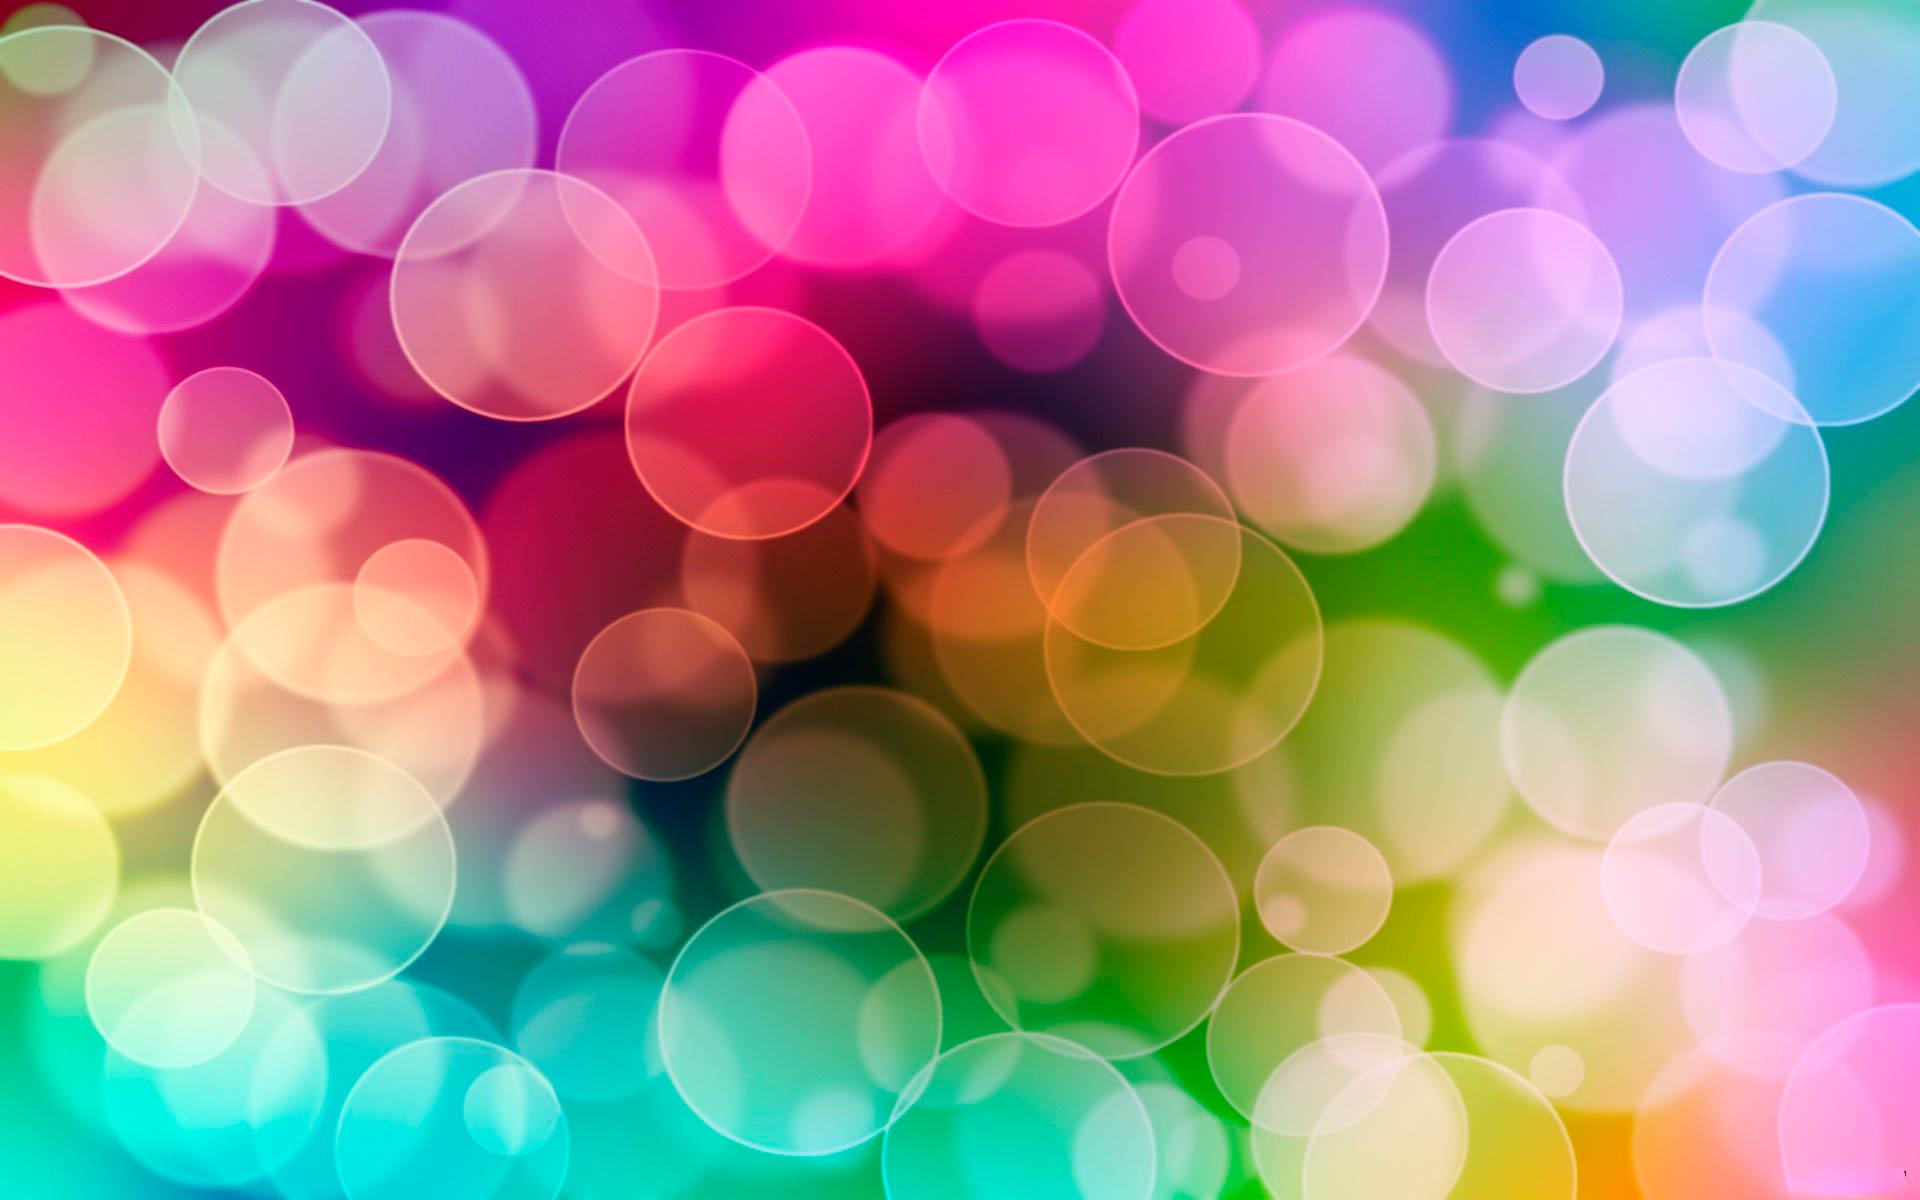 Colorful Abstract Wallpaper 1933 Hd Wallpapers in Abstract   Imagesci 1920x1200